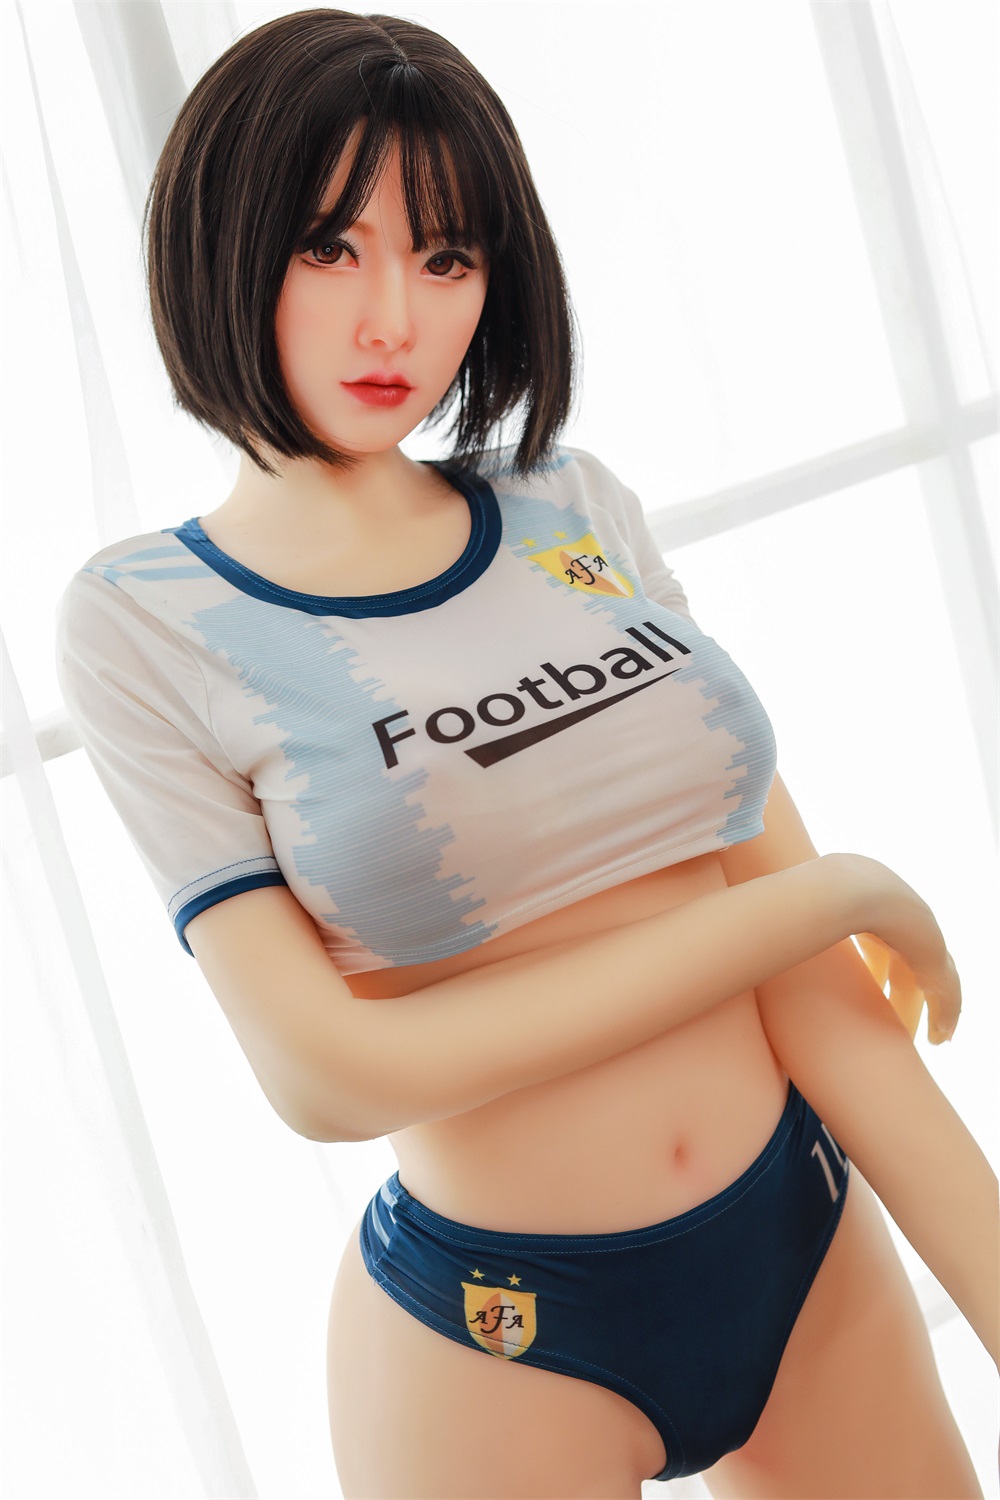 165cm Cheap Adult Dolls Artificial Sex Rubber Real Doll